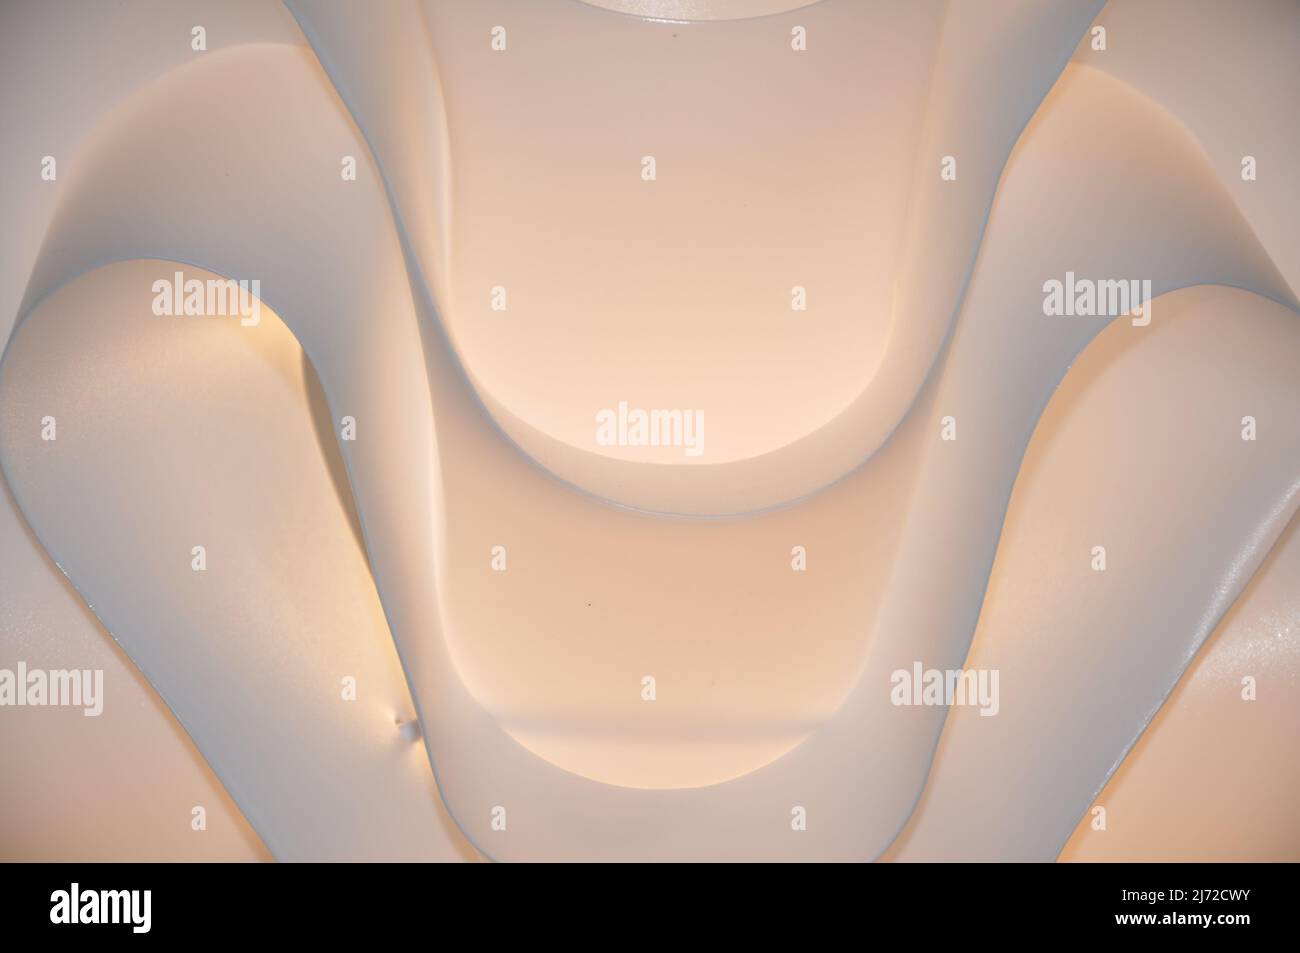 Abstract Taupe Beige light Smooth Curves Background Design on my chandelier Stock Photo